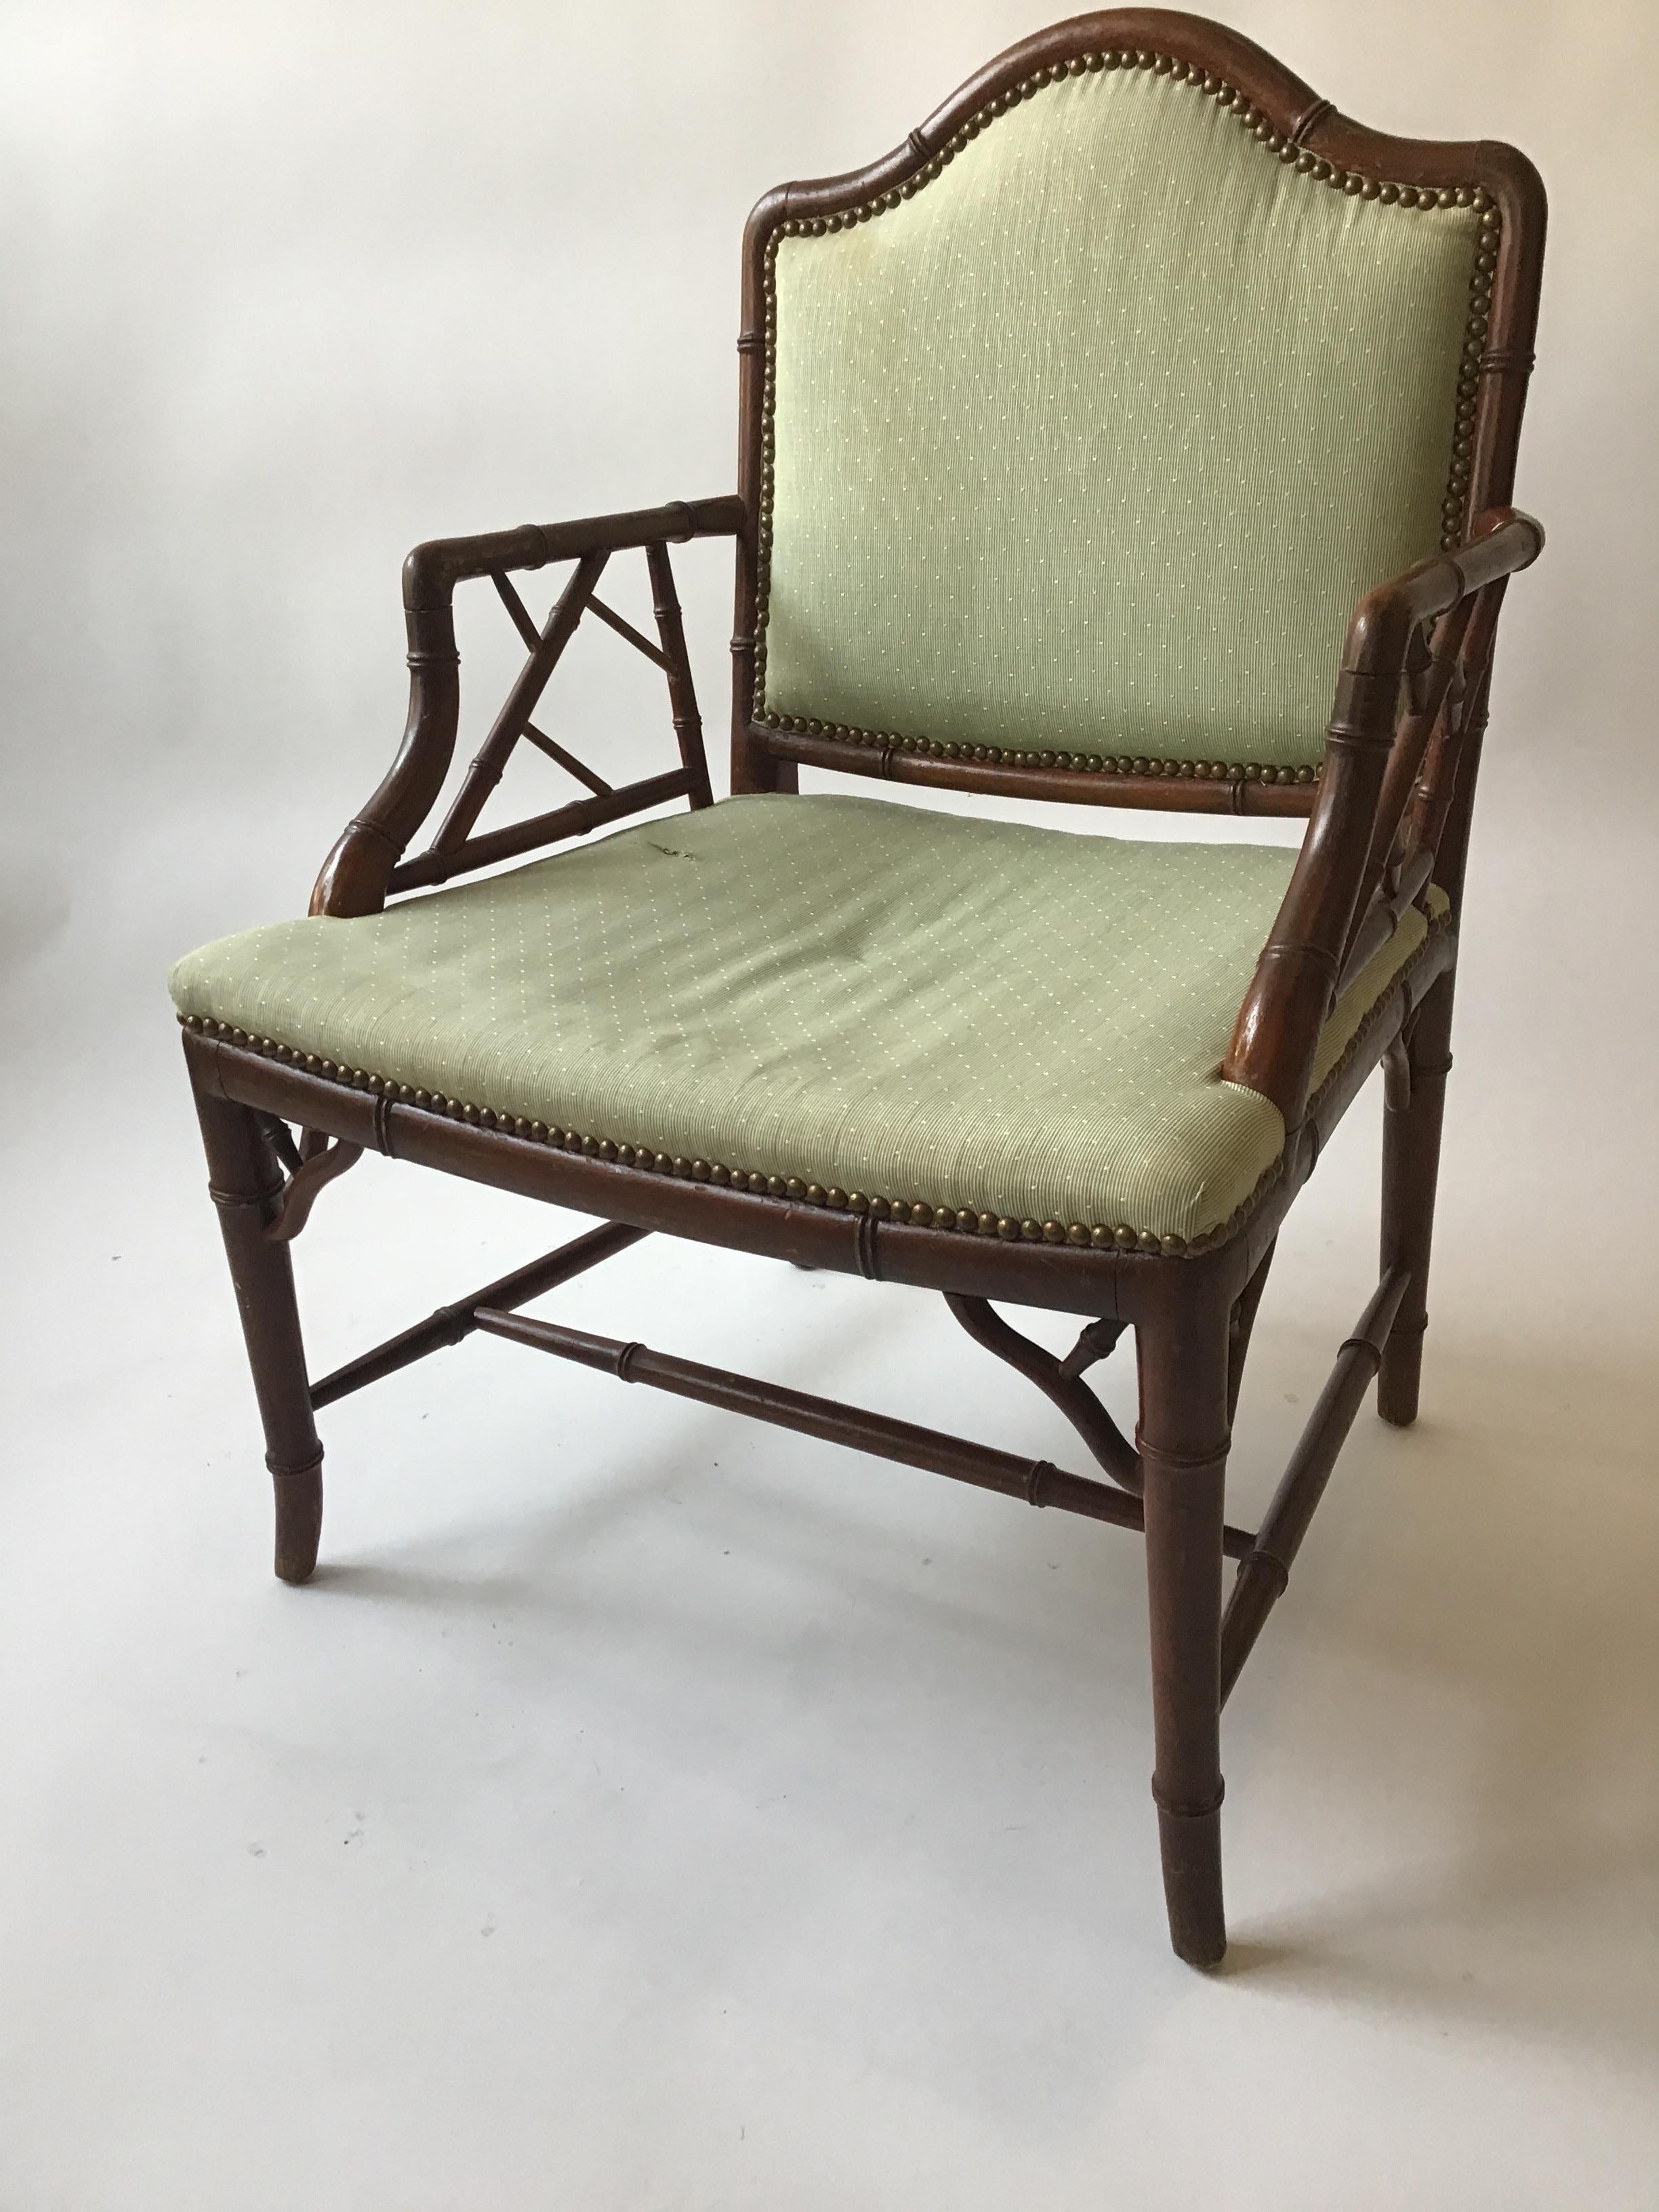 1970s oversized wood faux bamboo armchair. Very wide.